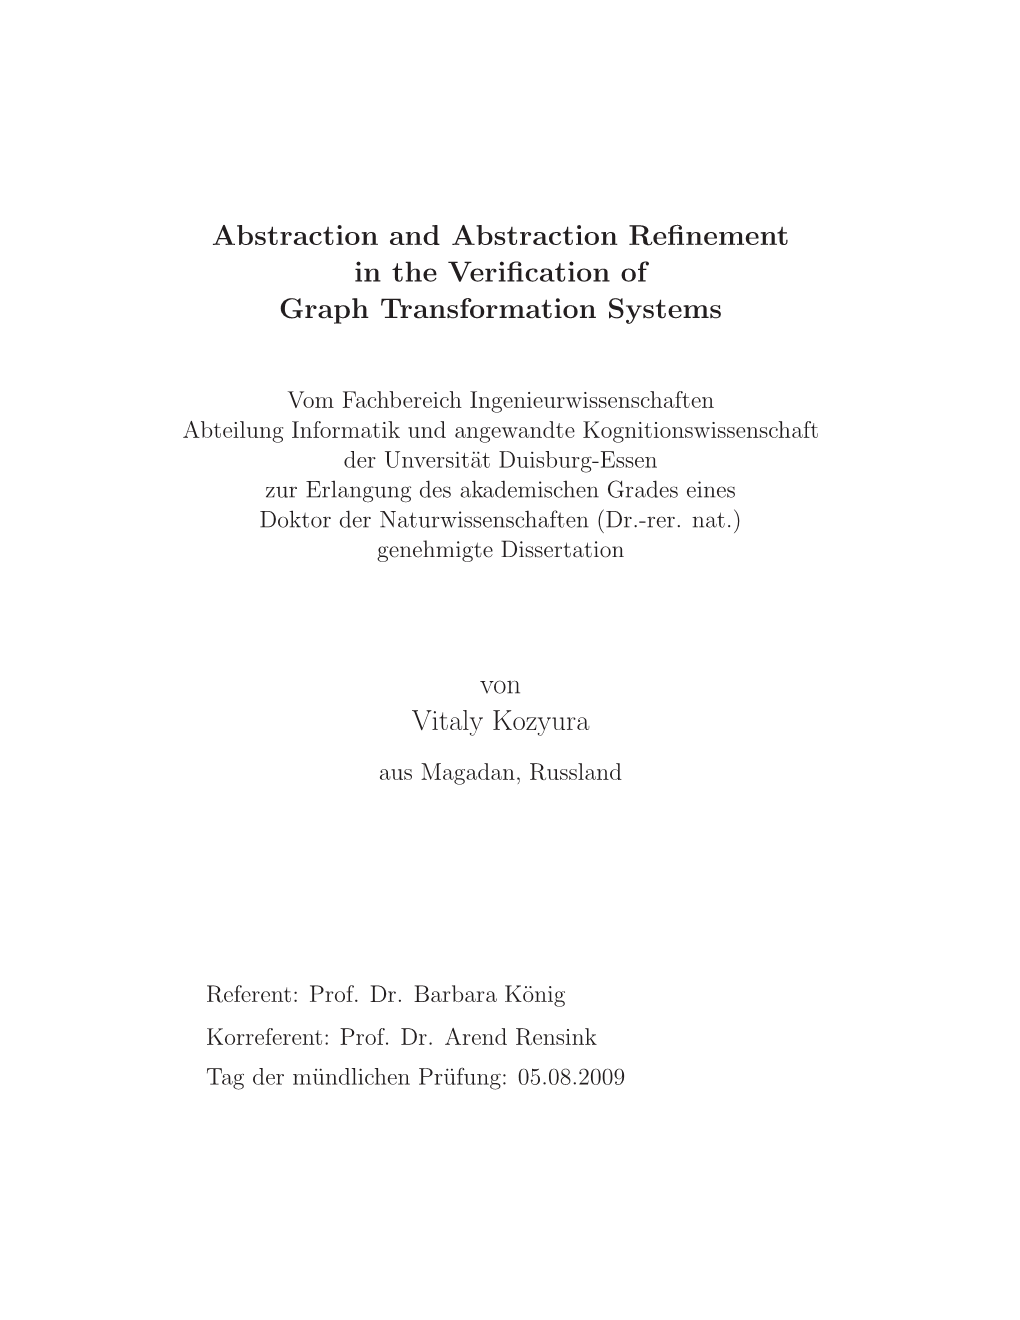 Abstraction and Abstraction Refinement in the Verification Of